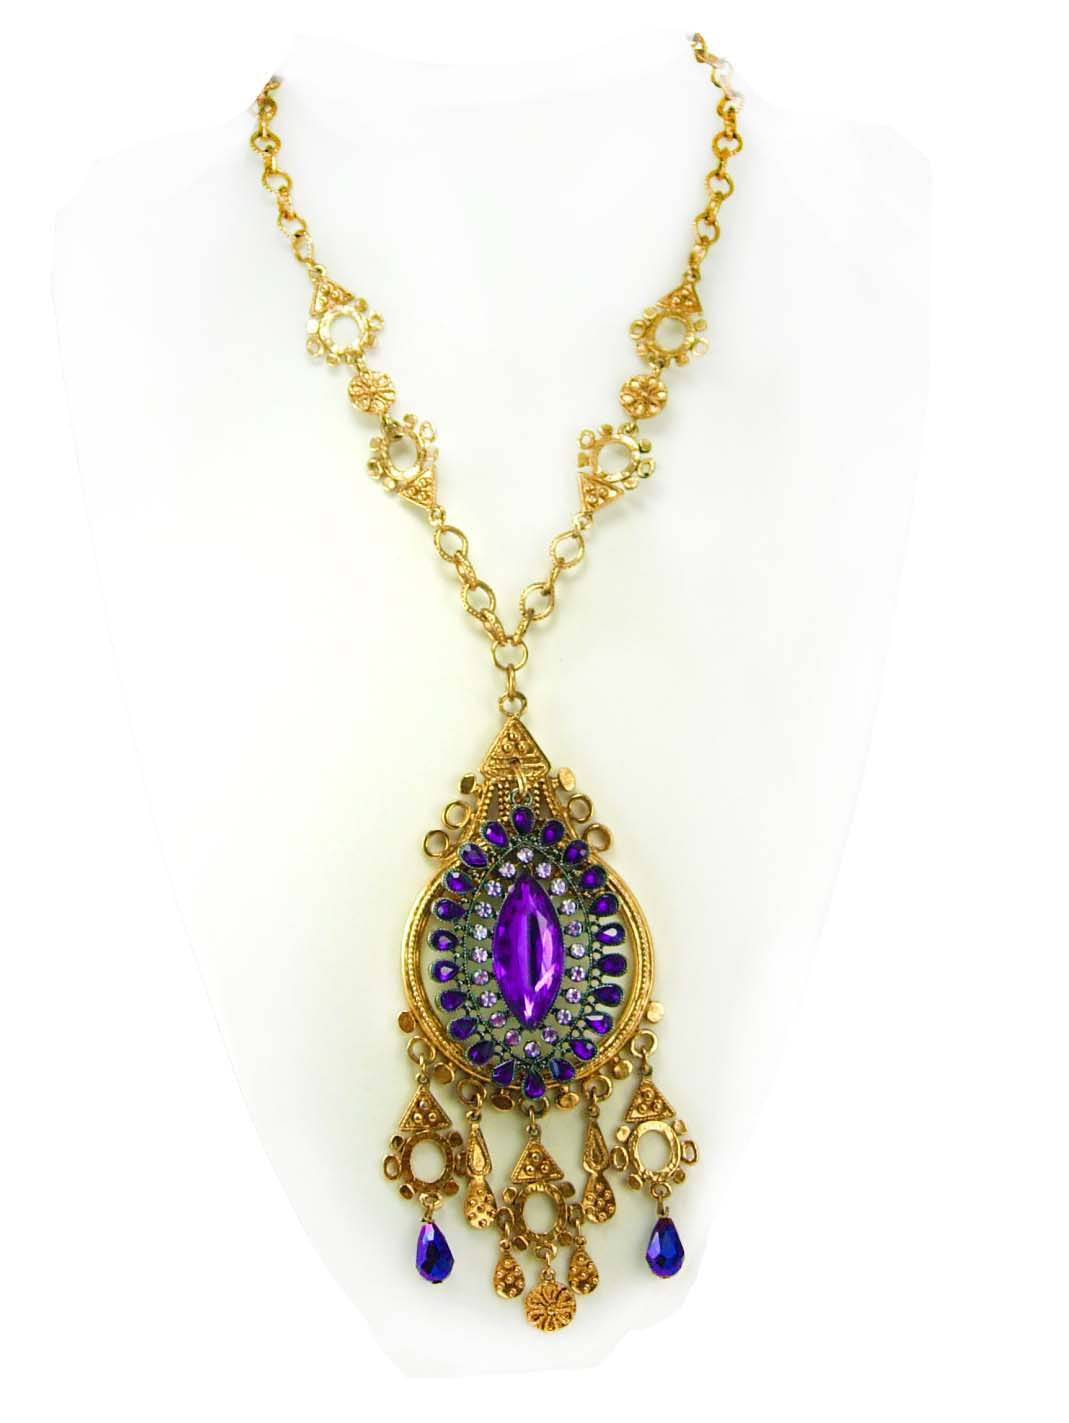 STUNNING Purple Chandelier Medieval necklace Goddess with aurora borealis Drops - $195.00